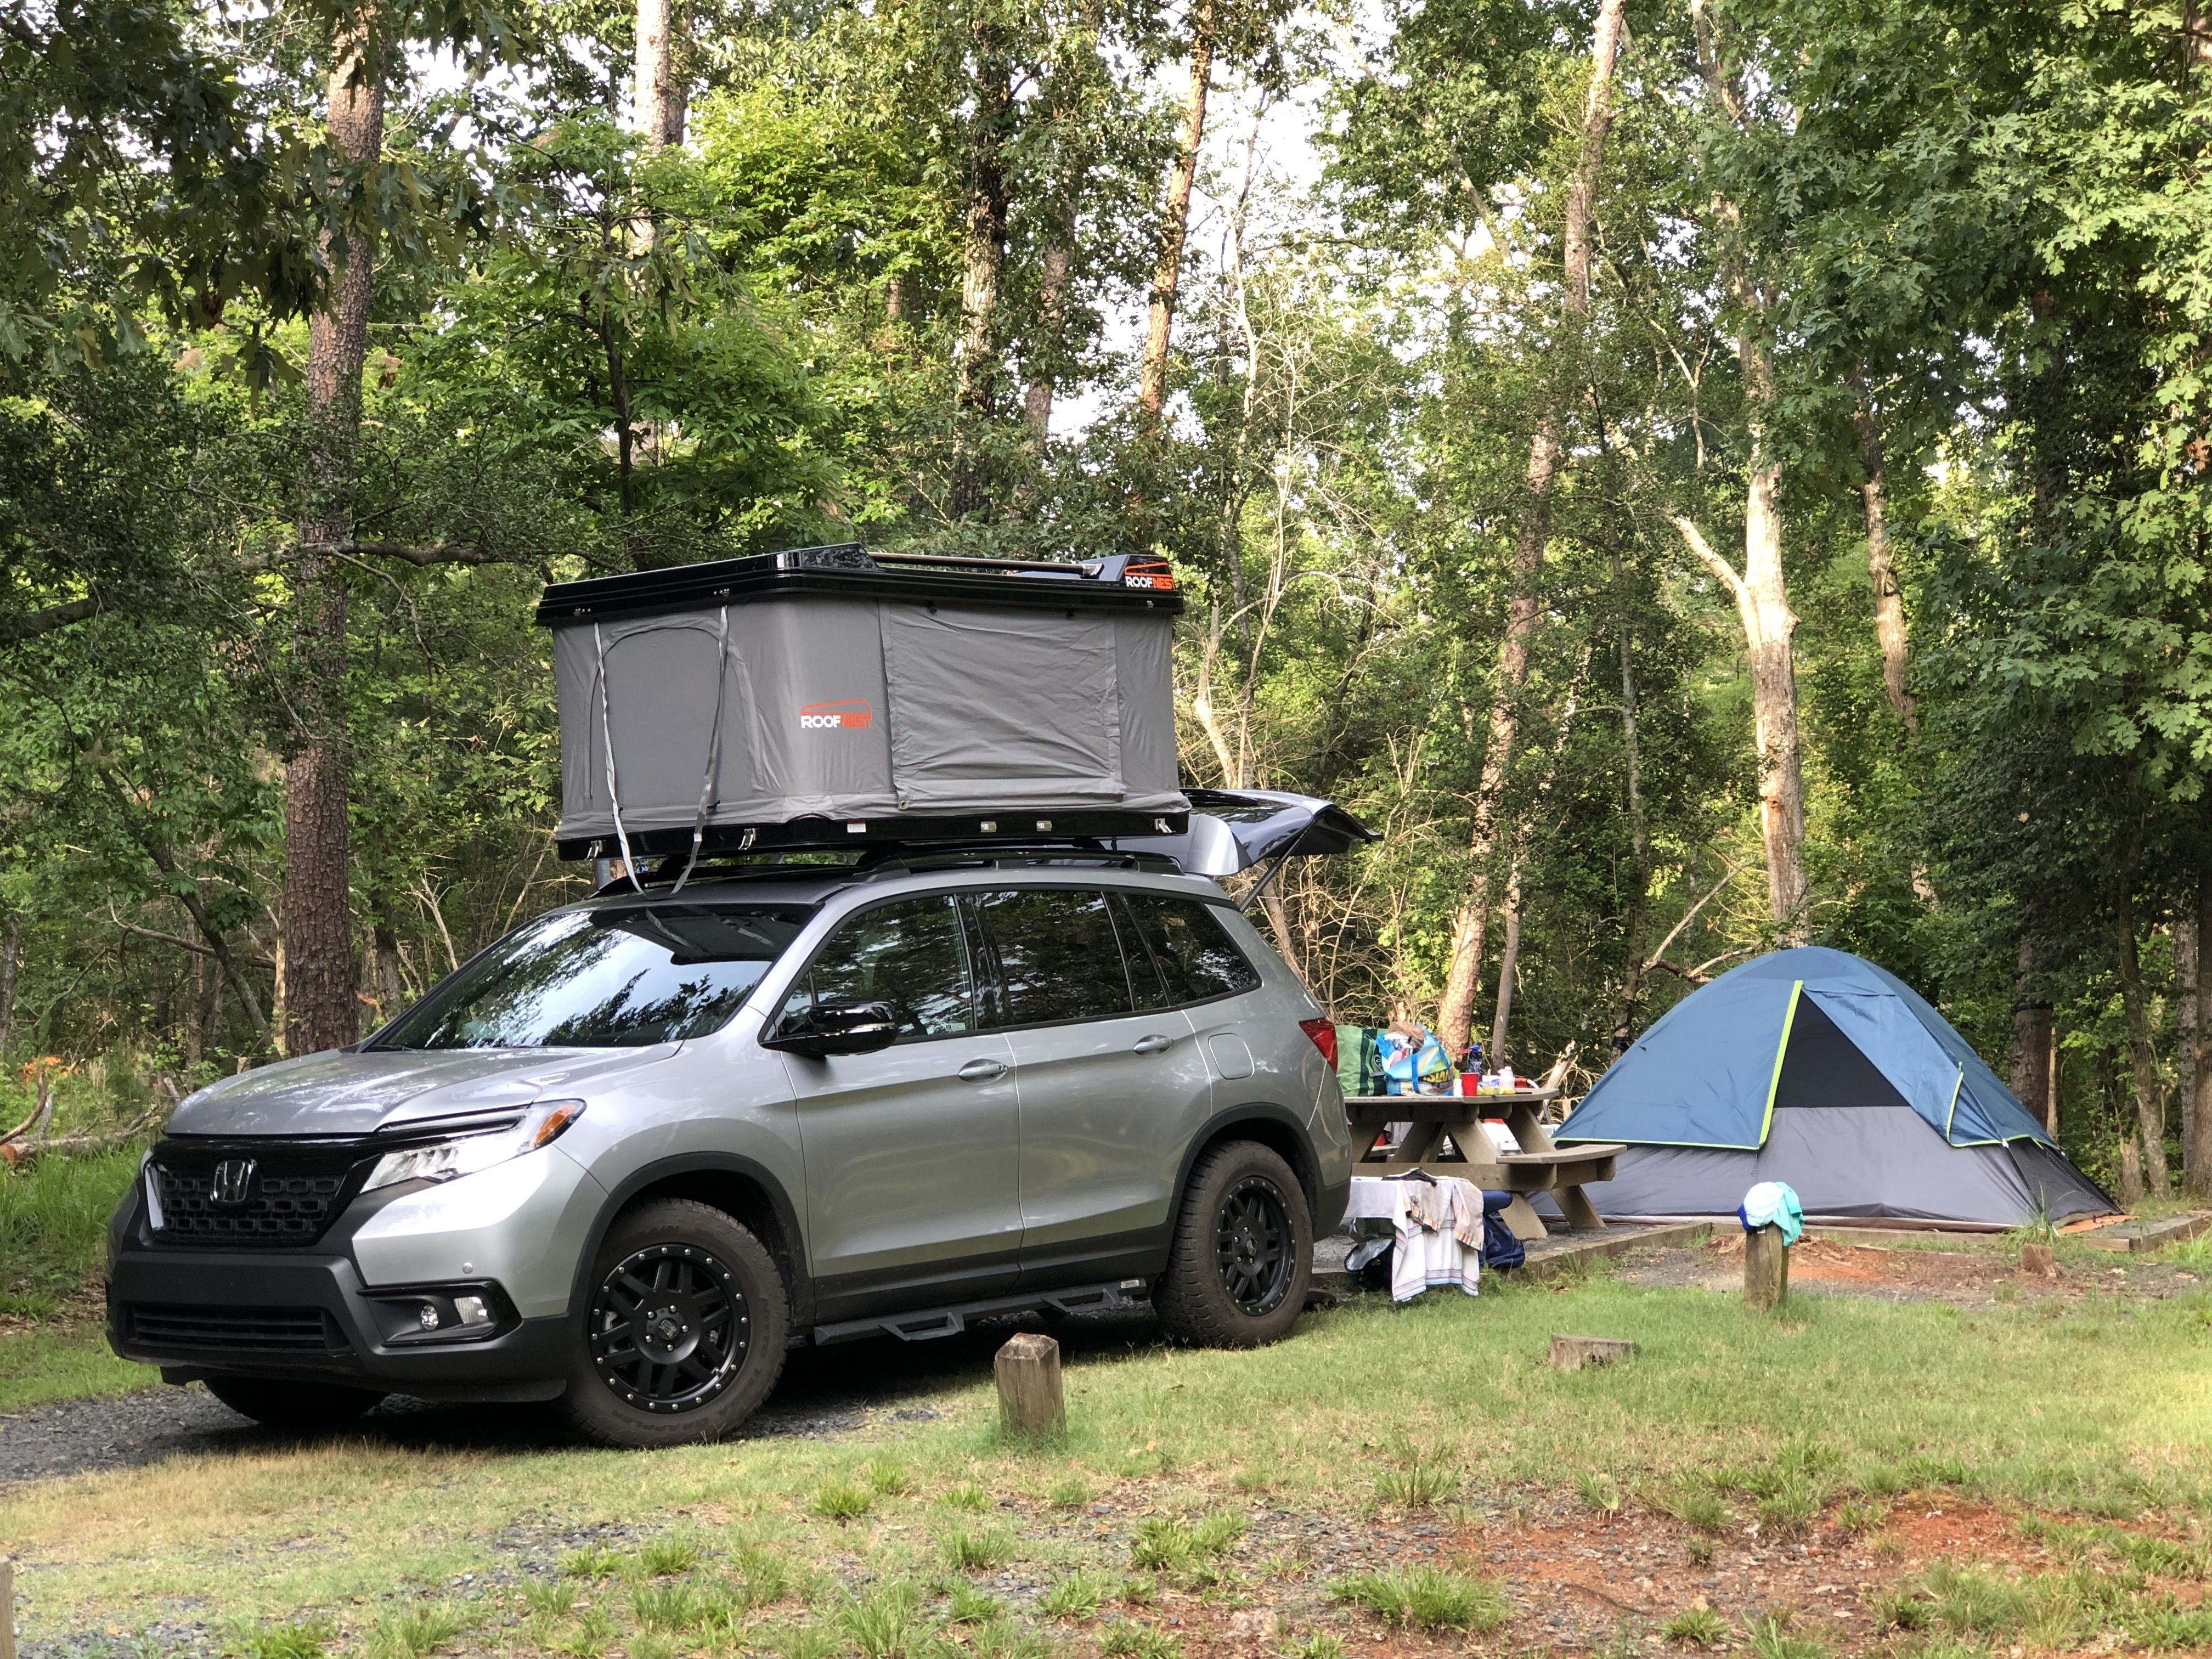 Suv good for camping